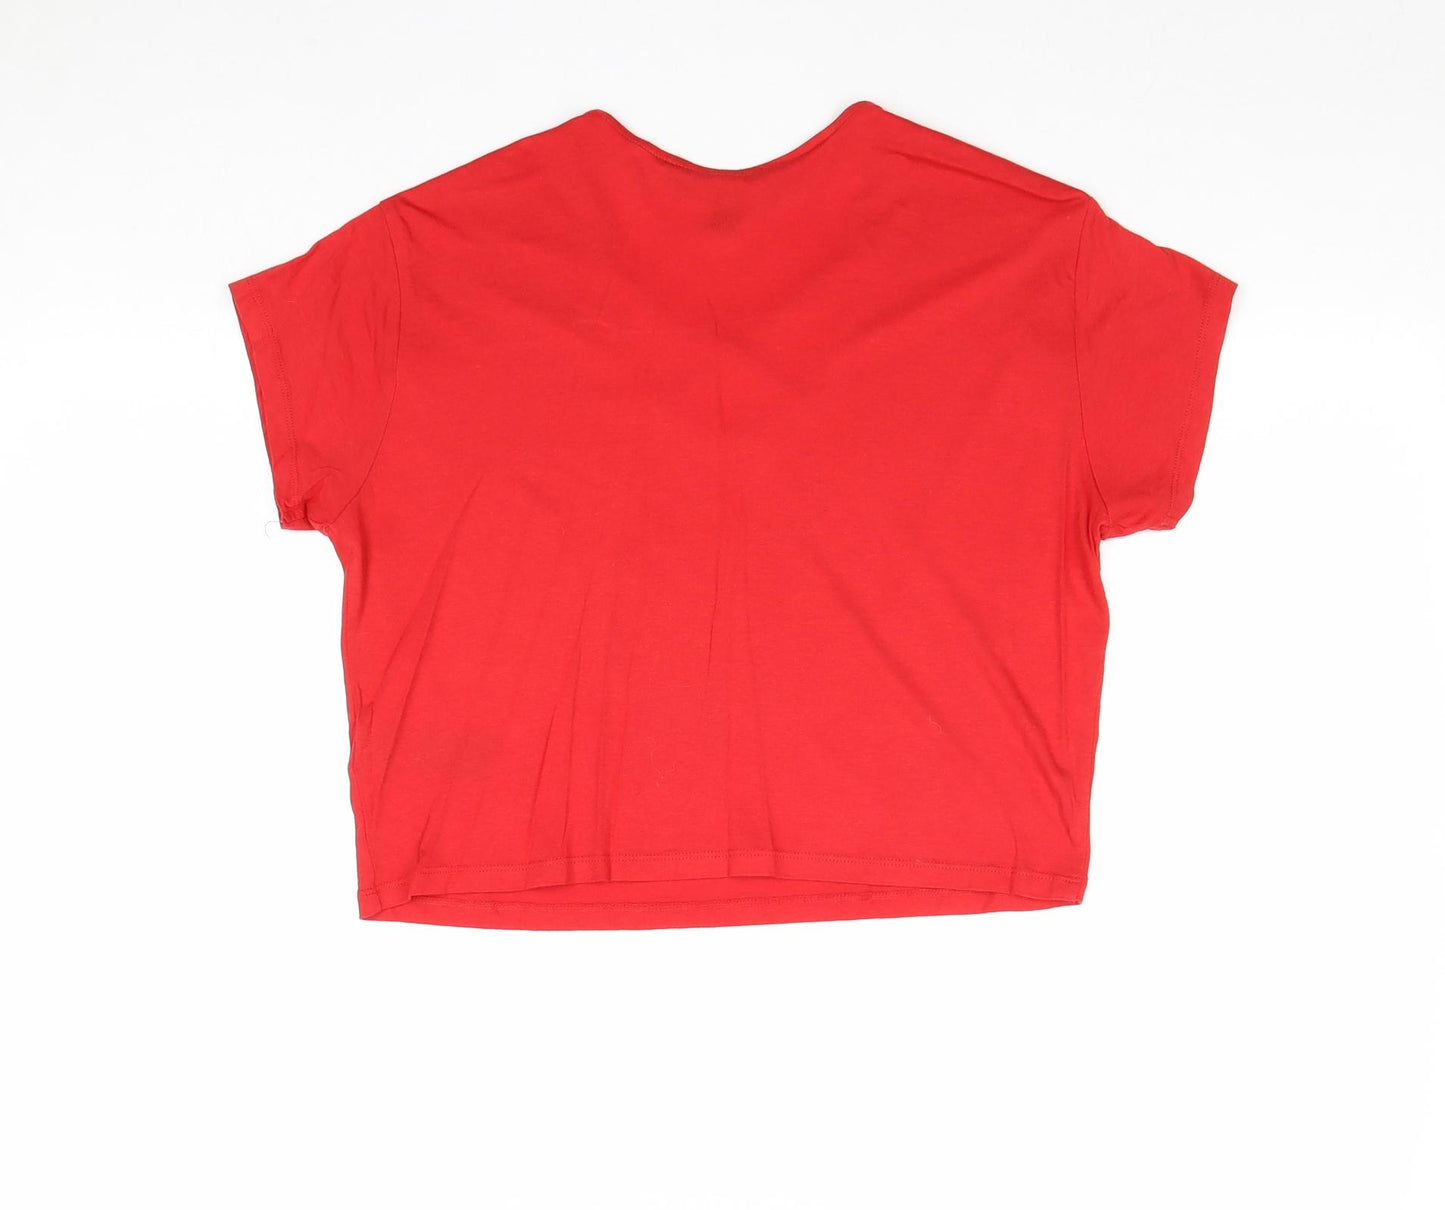 New Look Girls Red Cotton Basic T-Shirt Size 12-13 Years Scoop Neck Pullover